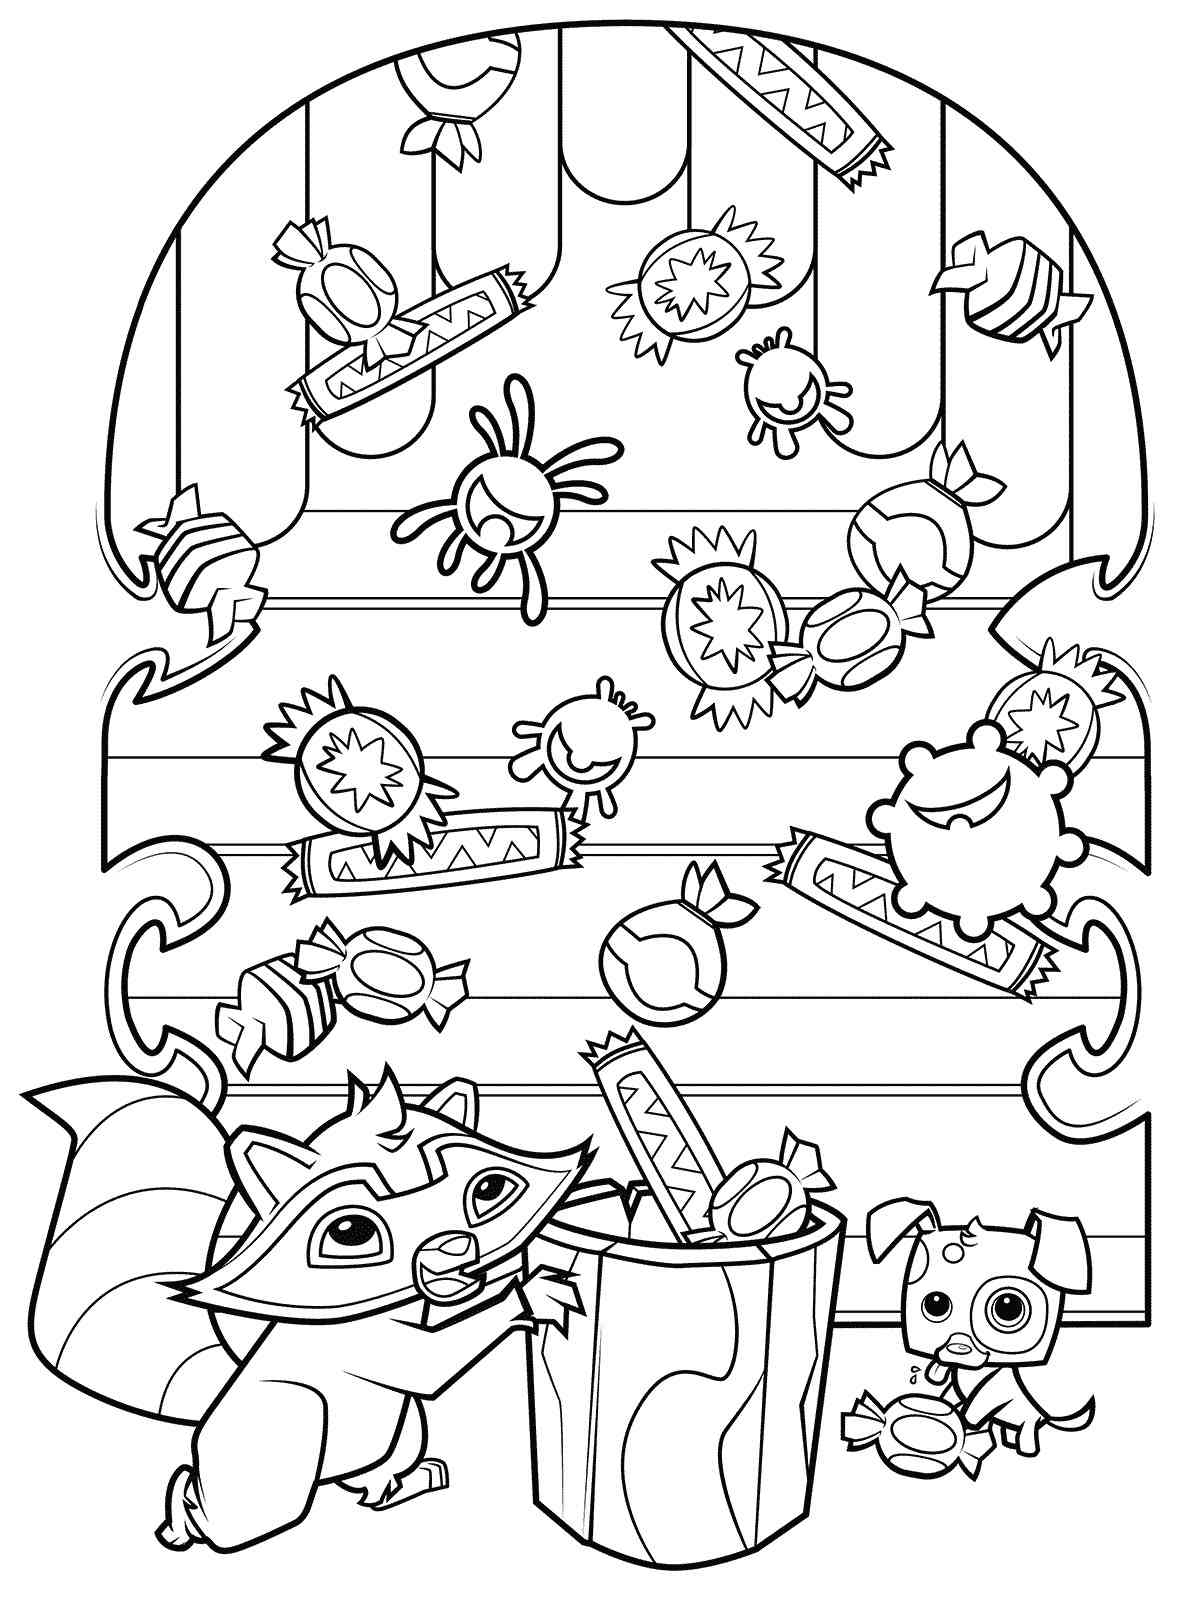 Raccoon with candy Animal Jam coloring page